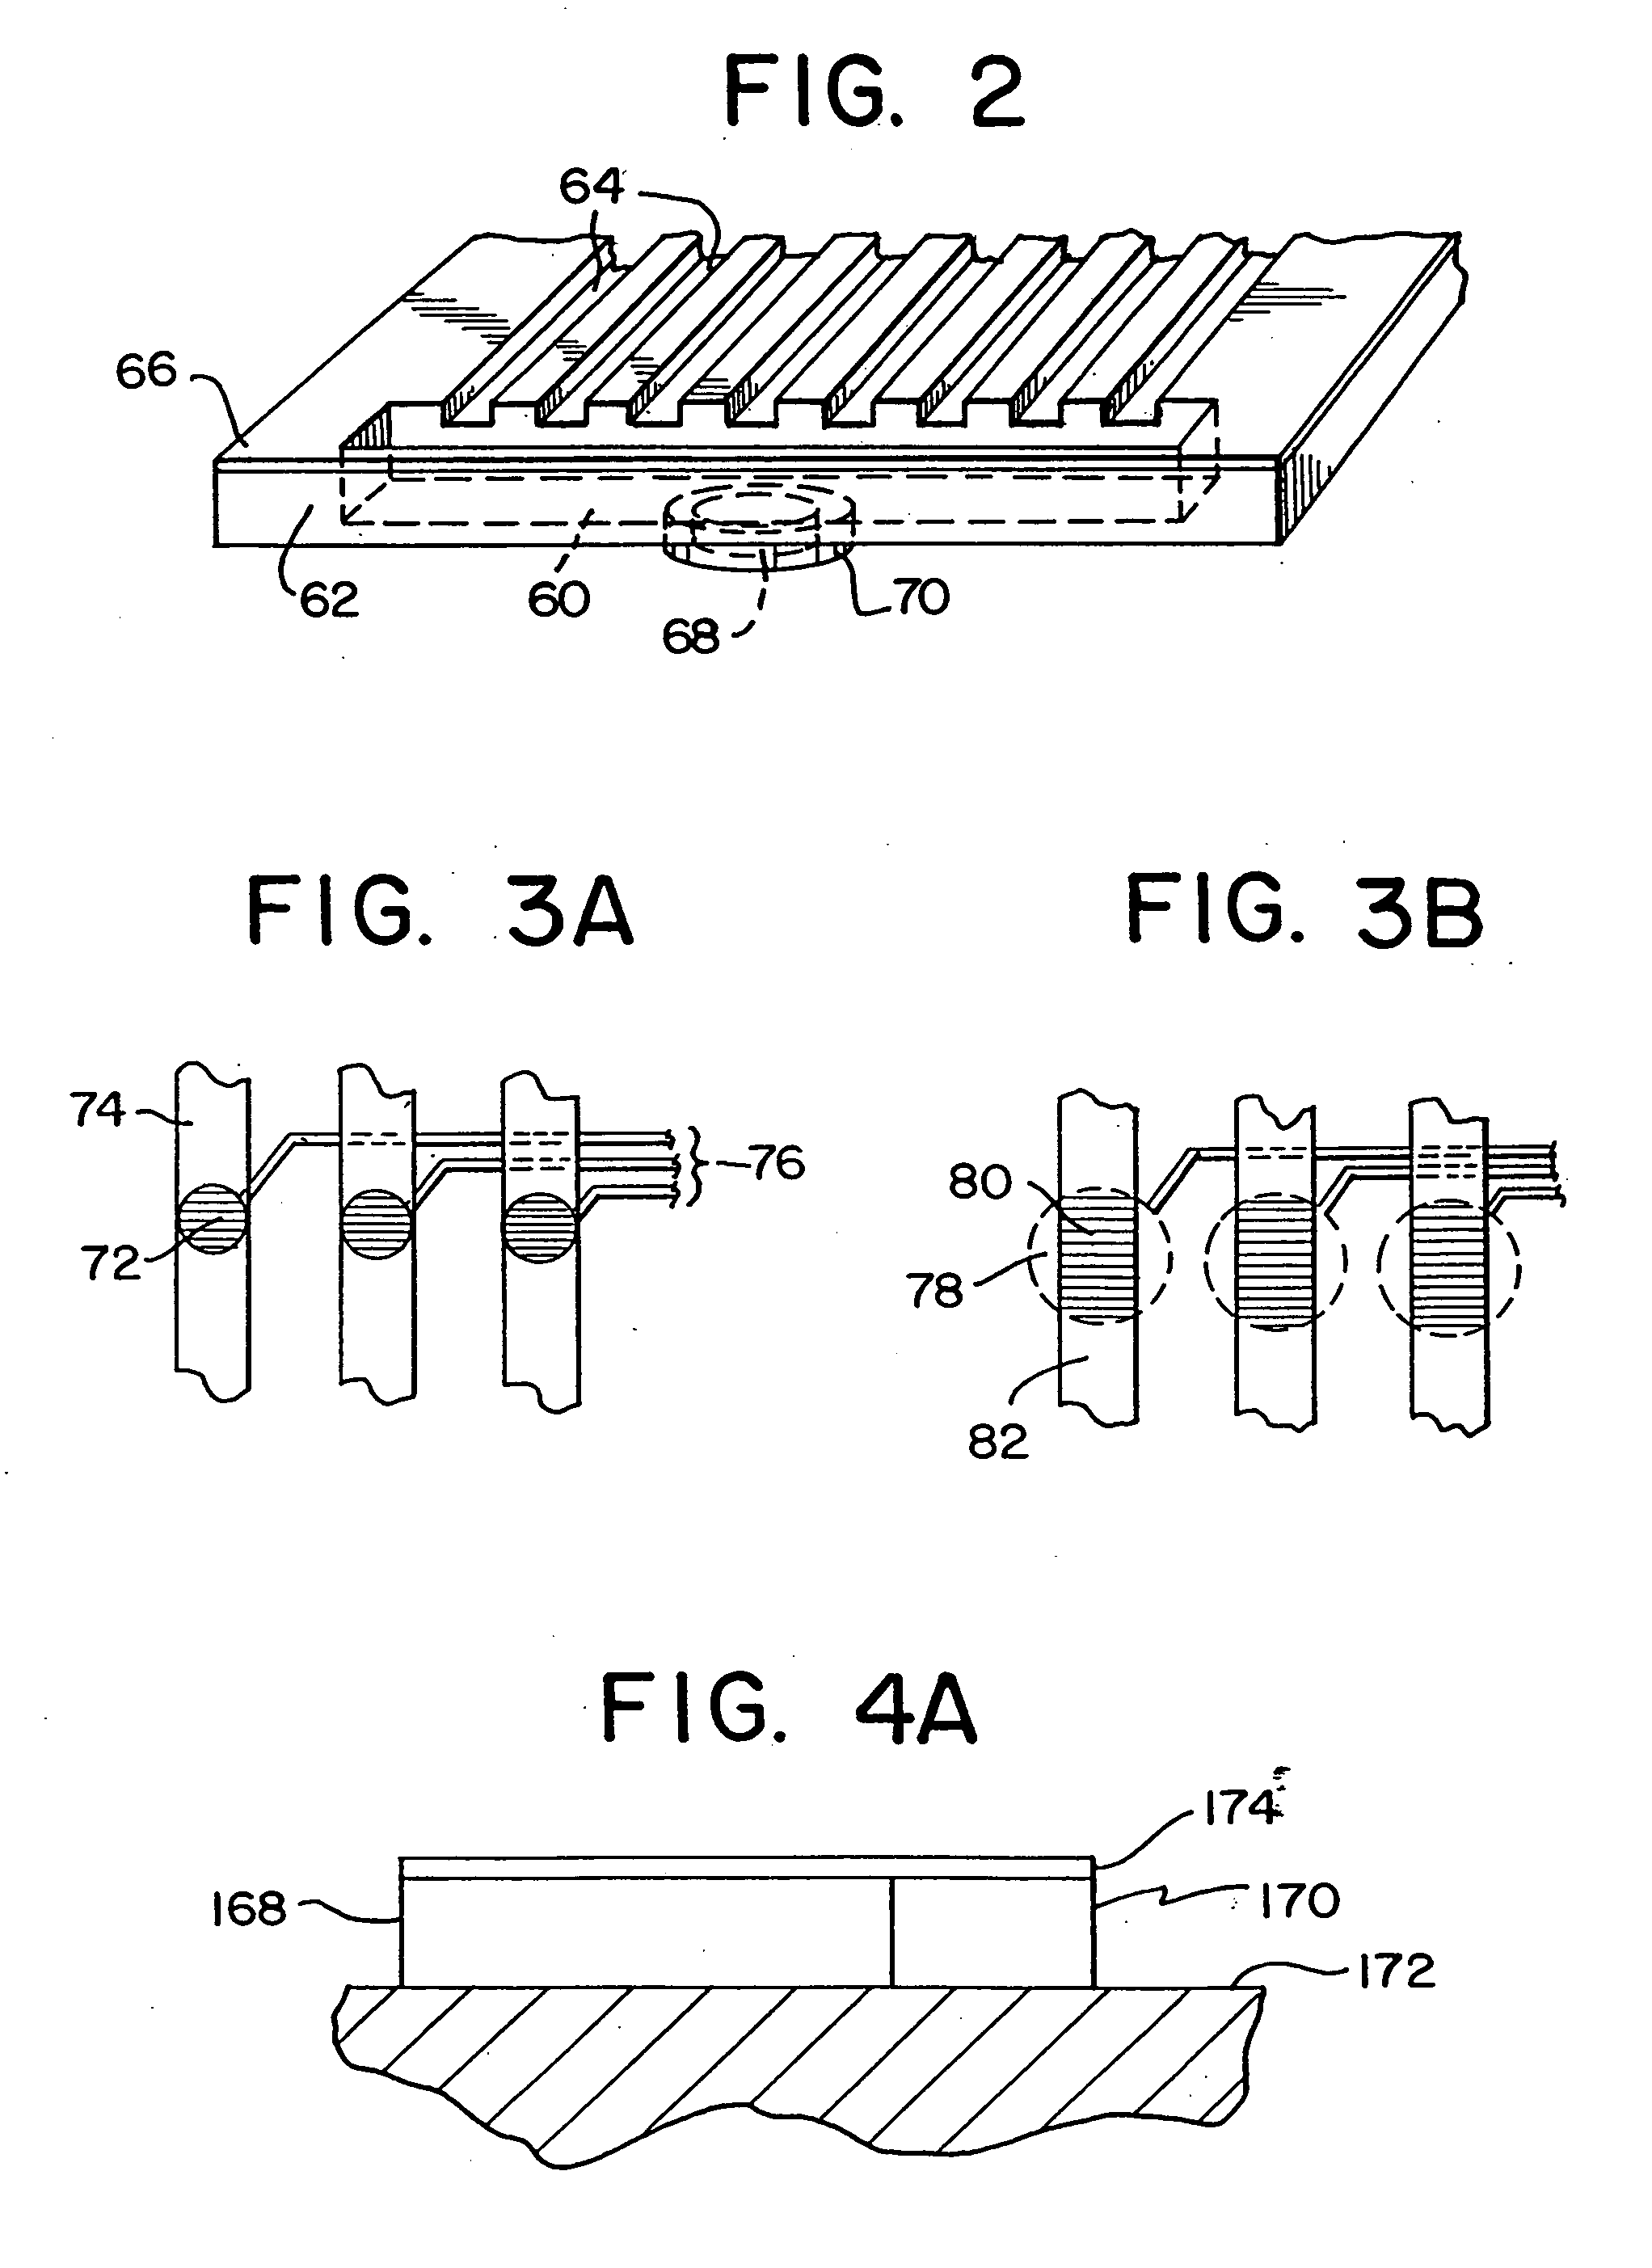 Integrated active flux microfluidic devices and methods